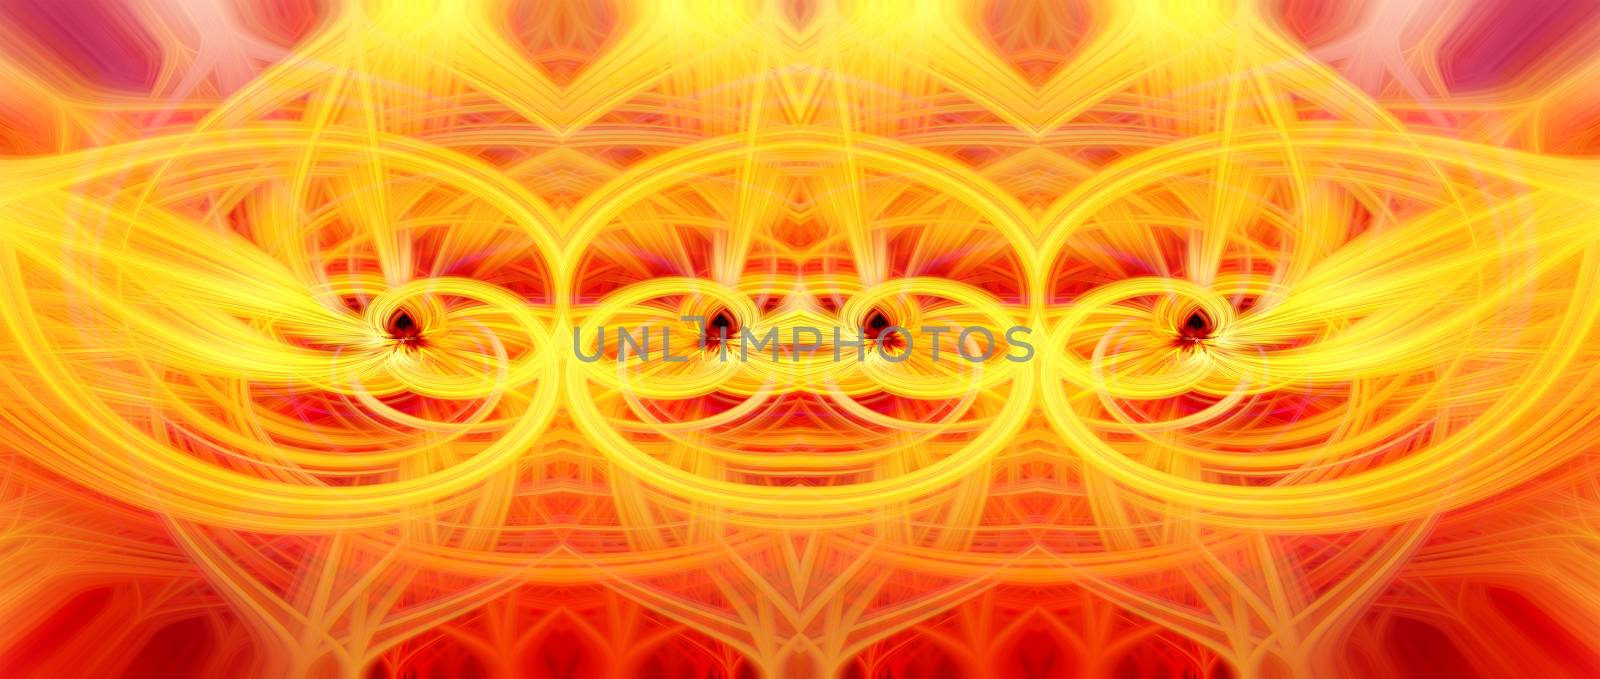 Beautiful abstract intertwined glowing 3d fibers forming a shape of sparkle, flame, flower, interlinked hearts. Yellow, orange, and red colors. Banner size. Illustration by DamantisZ